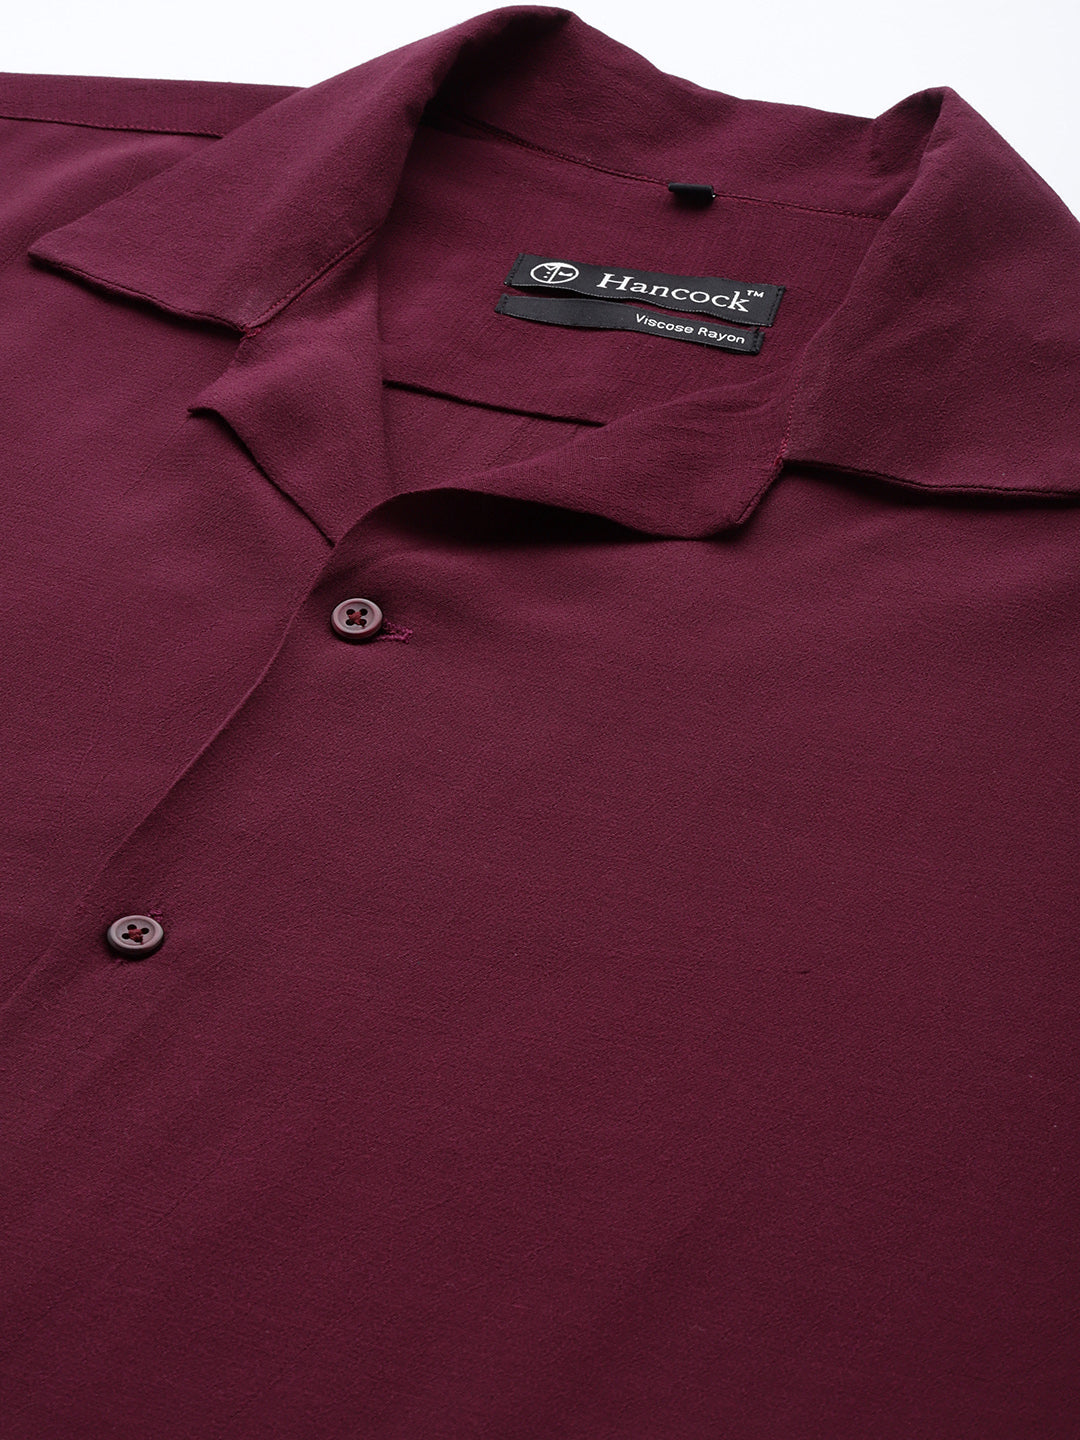 Men Burgundy Solid Viscose Rayon Relaxed Fit Casual Shirt